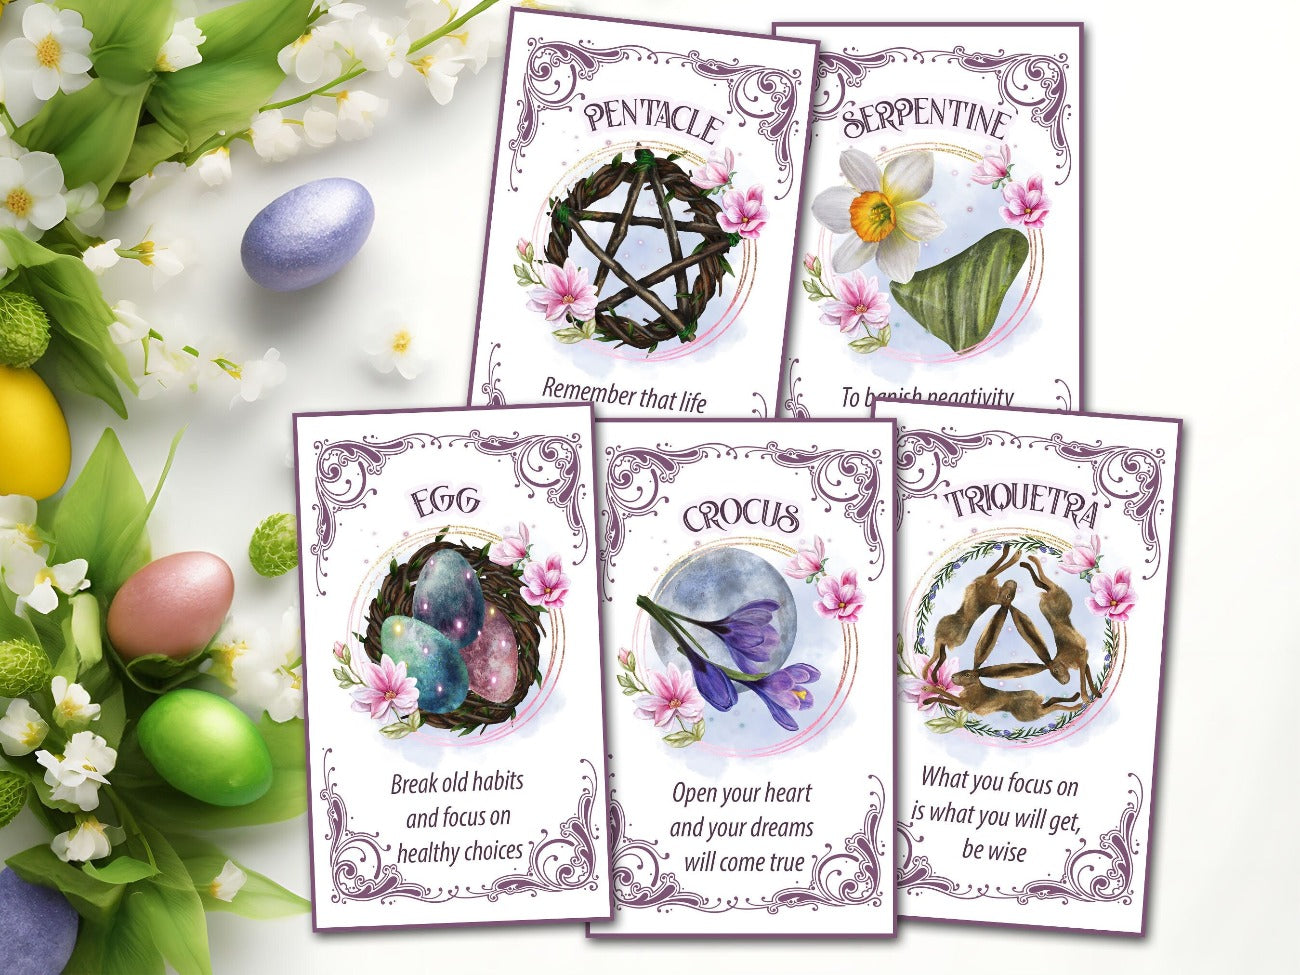 OSTARA ORACLE CARDS, Printable Tarot Messages, Pentacle, Serpentine, Egg, Crocus and Triquetra Cards - Morgana Magick Spell